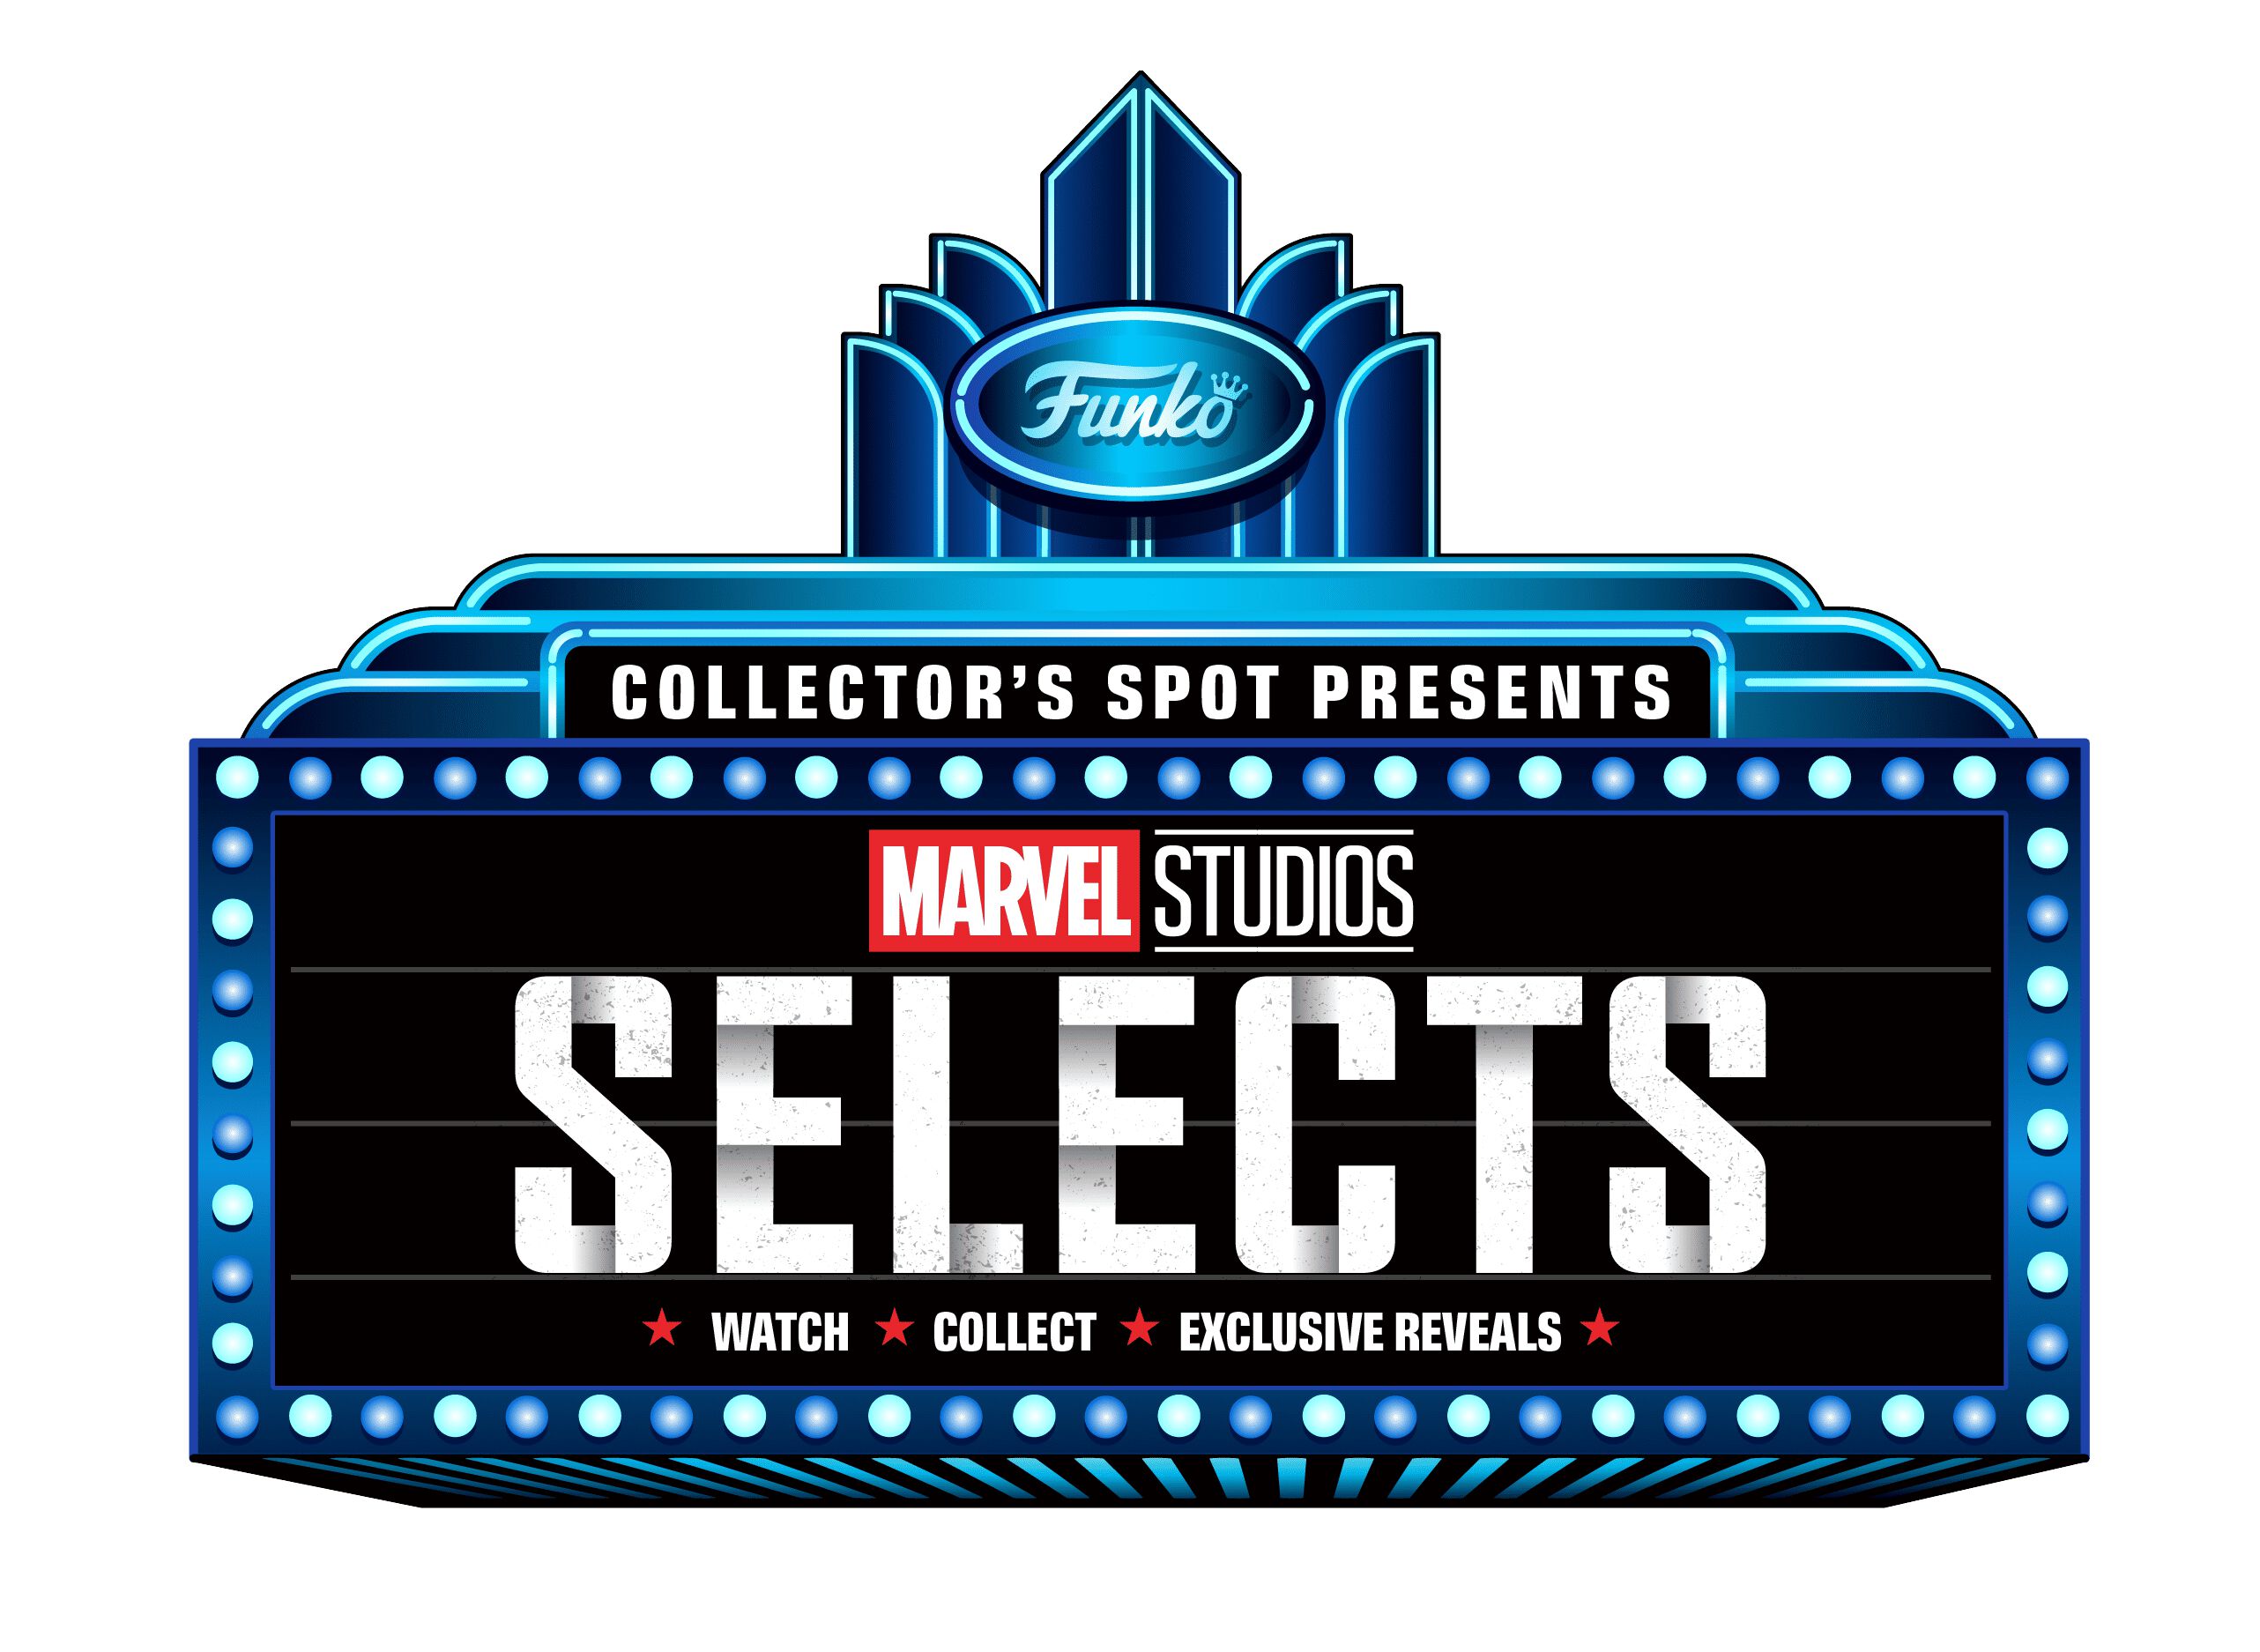 Marvel Studios Selects Announcements